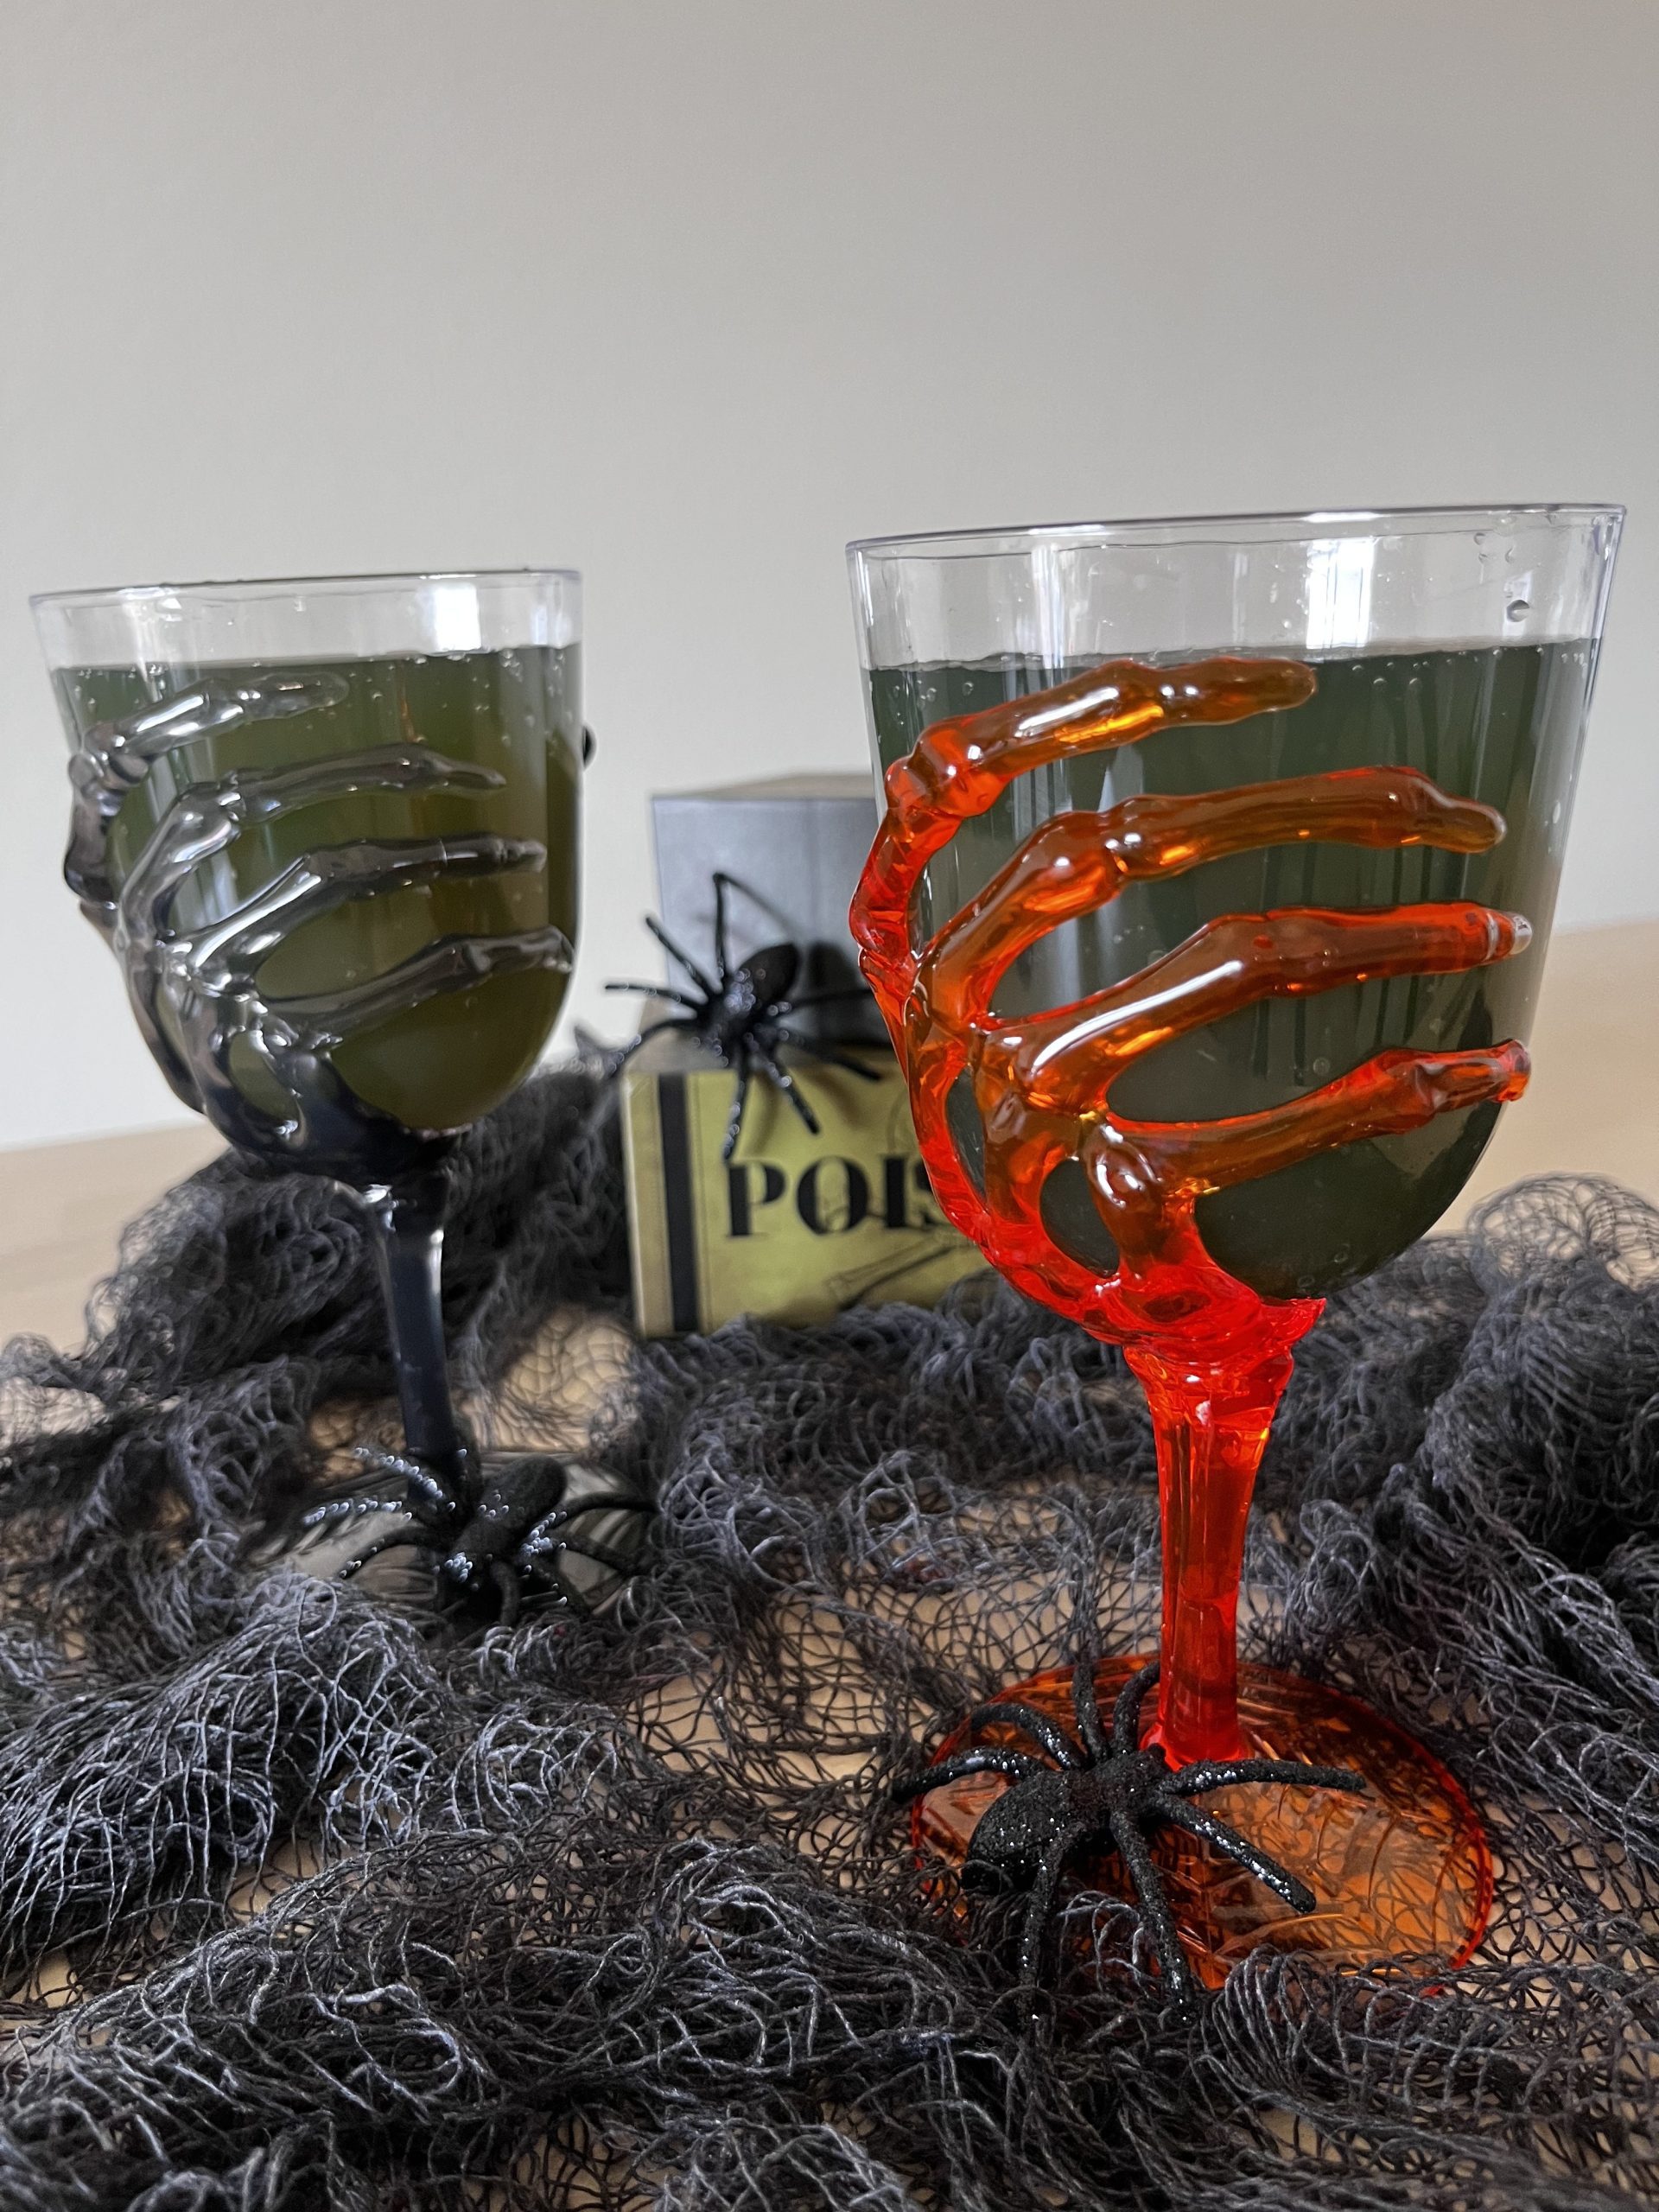 Spooky green drinks in goblets that have skeleton hands. One of the goblets is glowing red.